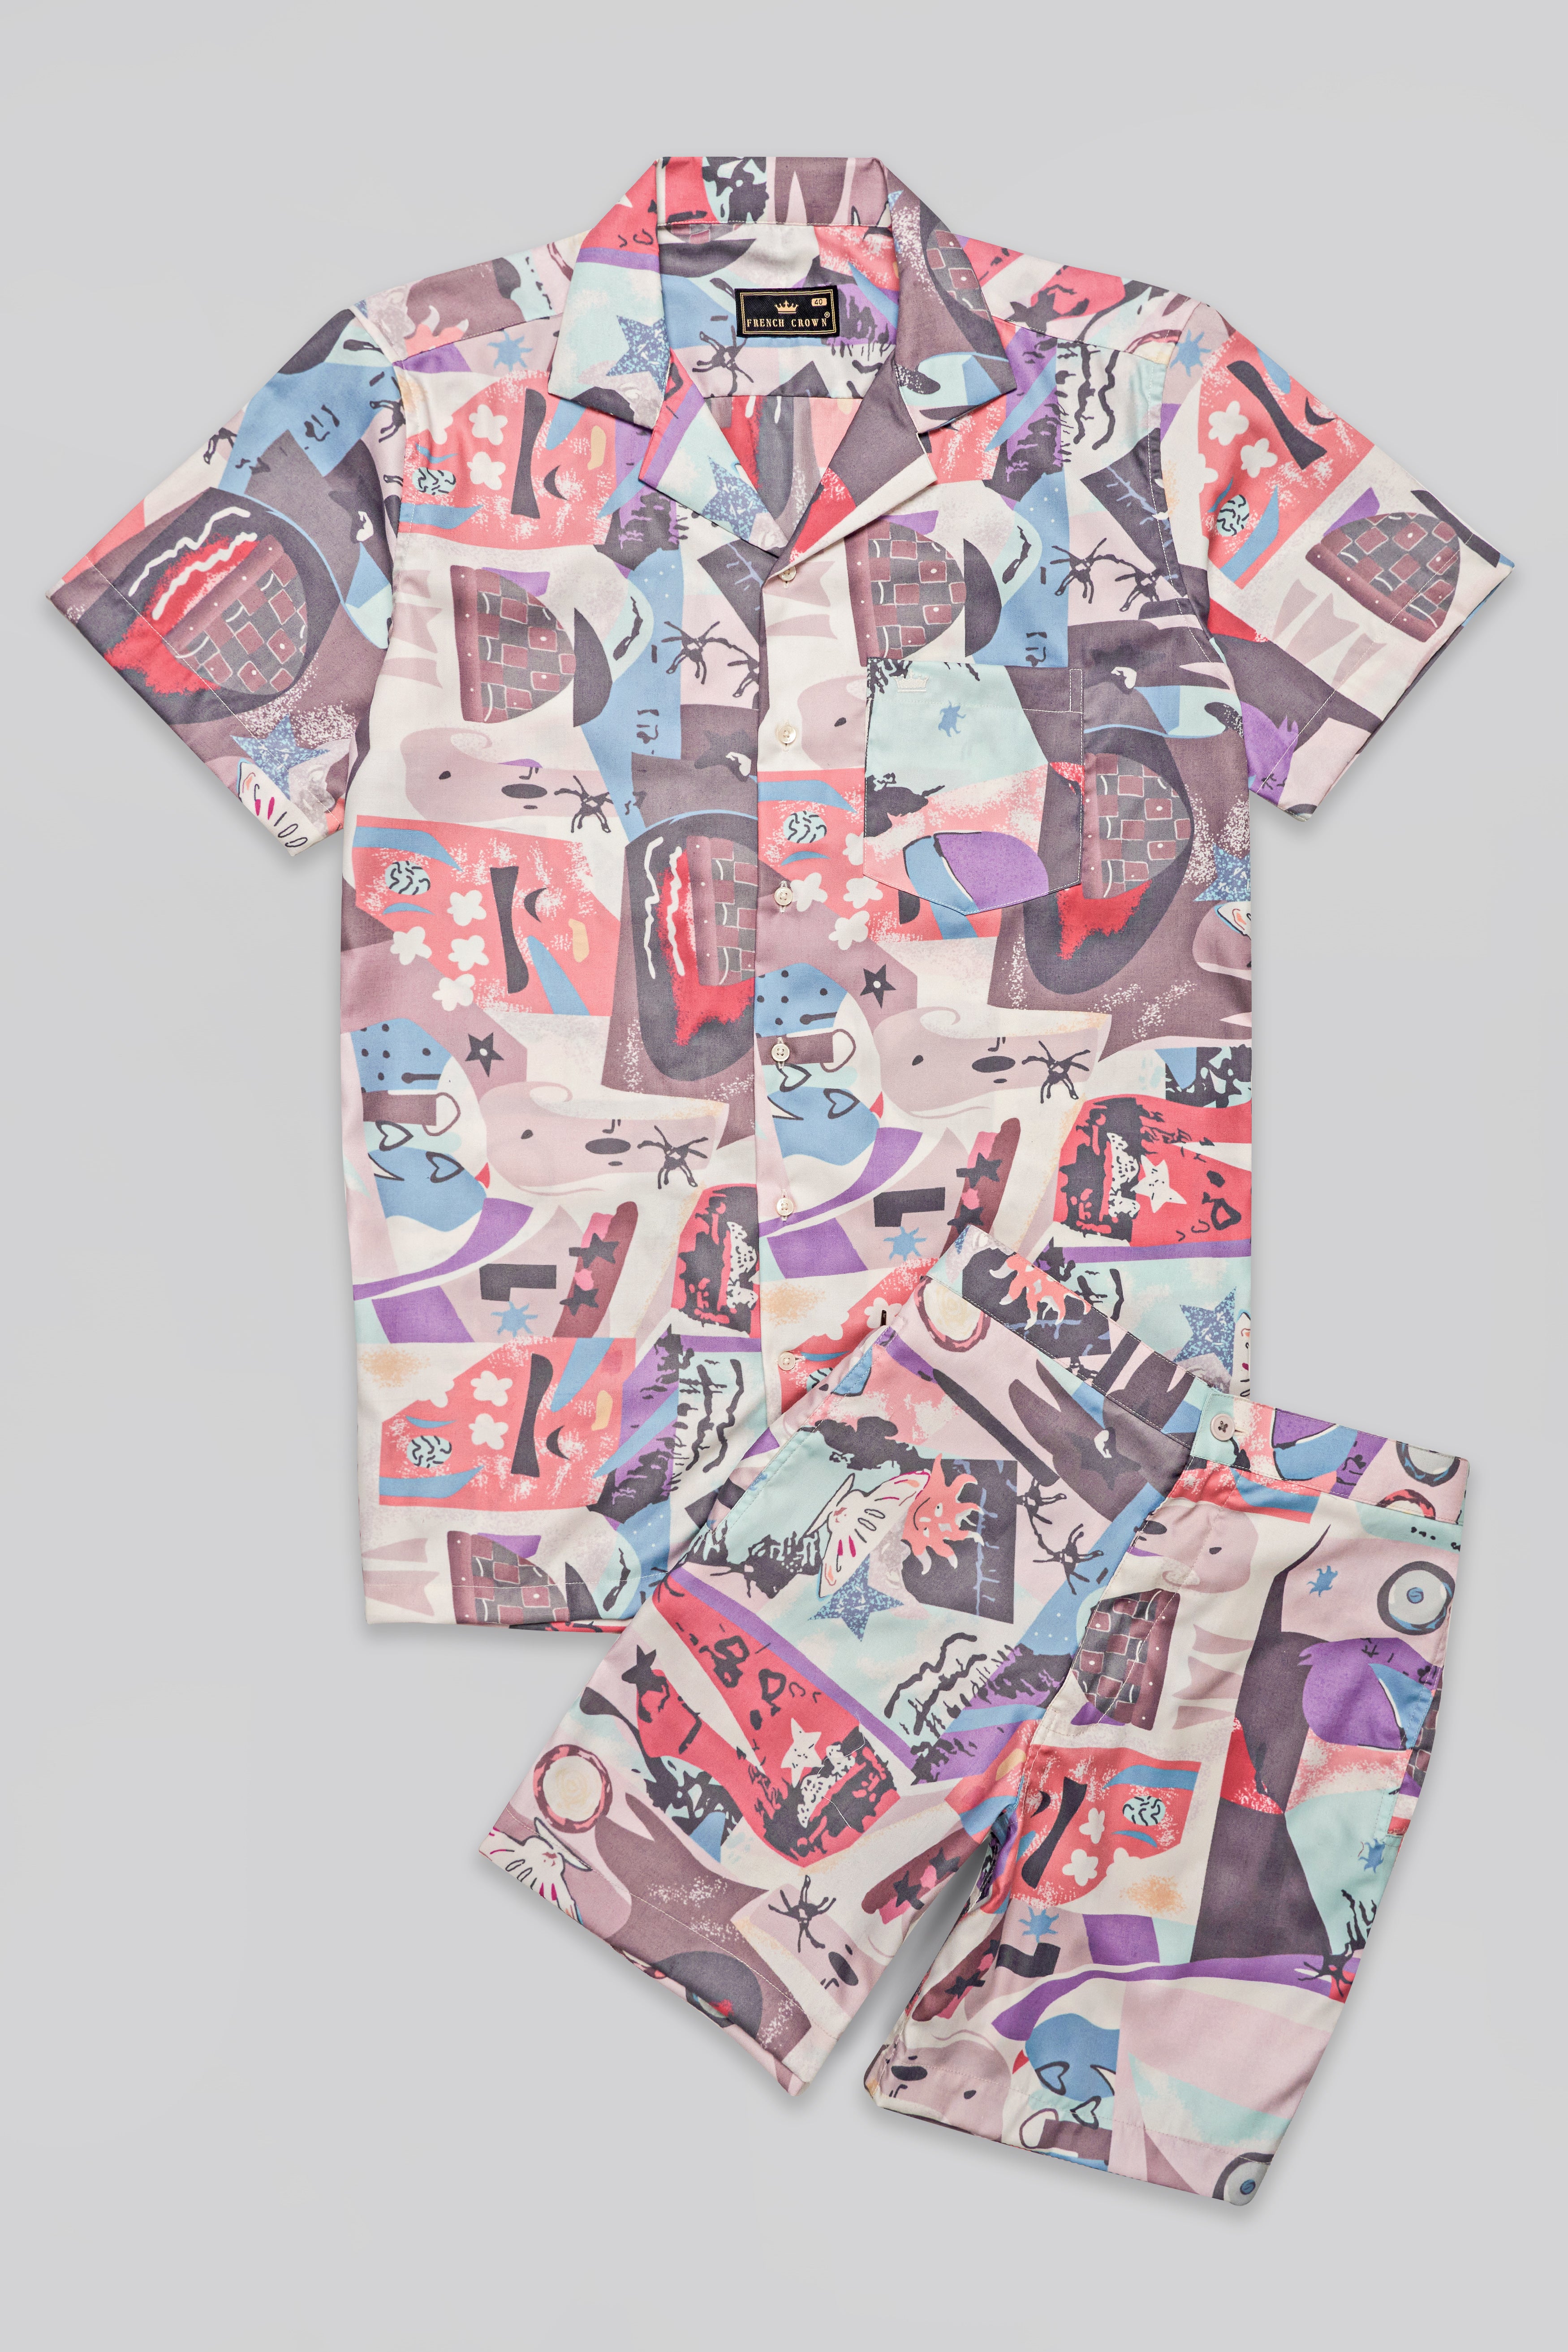 Flare Peach With Jordy Blue and Rouge Pink Abstract Printed Super Soft Premium Cotton Co-ord Sets 10577-CC-SS-SR-283-38, 10577-CC-SS-SR-283-39, 10577-CC-SS-SR-283-40, 10577-CC-SS-SR-283-42, 10577-CC-SS-SR-283-44, 10577-CC-SS-SR-283-46, 10577-CC-SS-SR-283-48, 10577-CC-SS-SR-283-50, 10577-CC-SS-SR-283-52